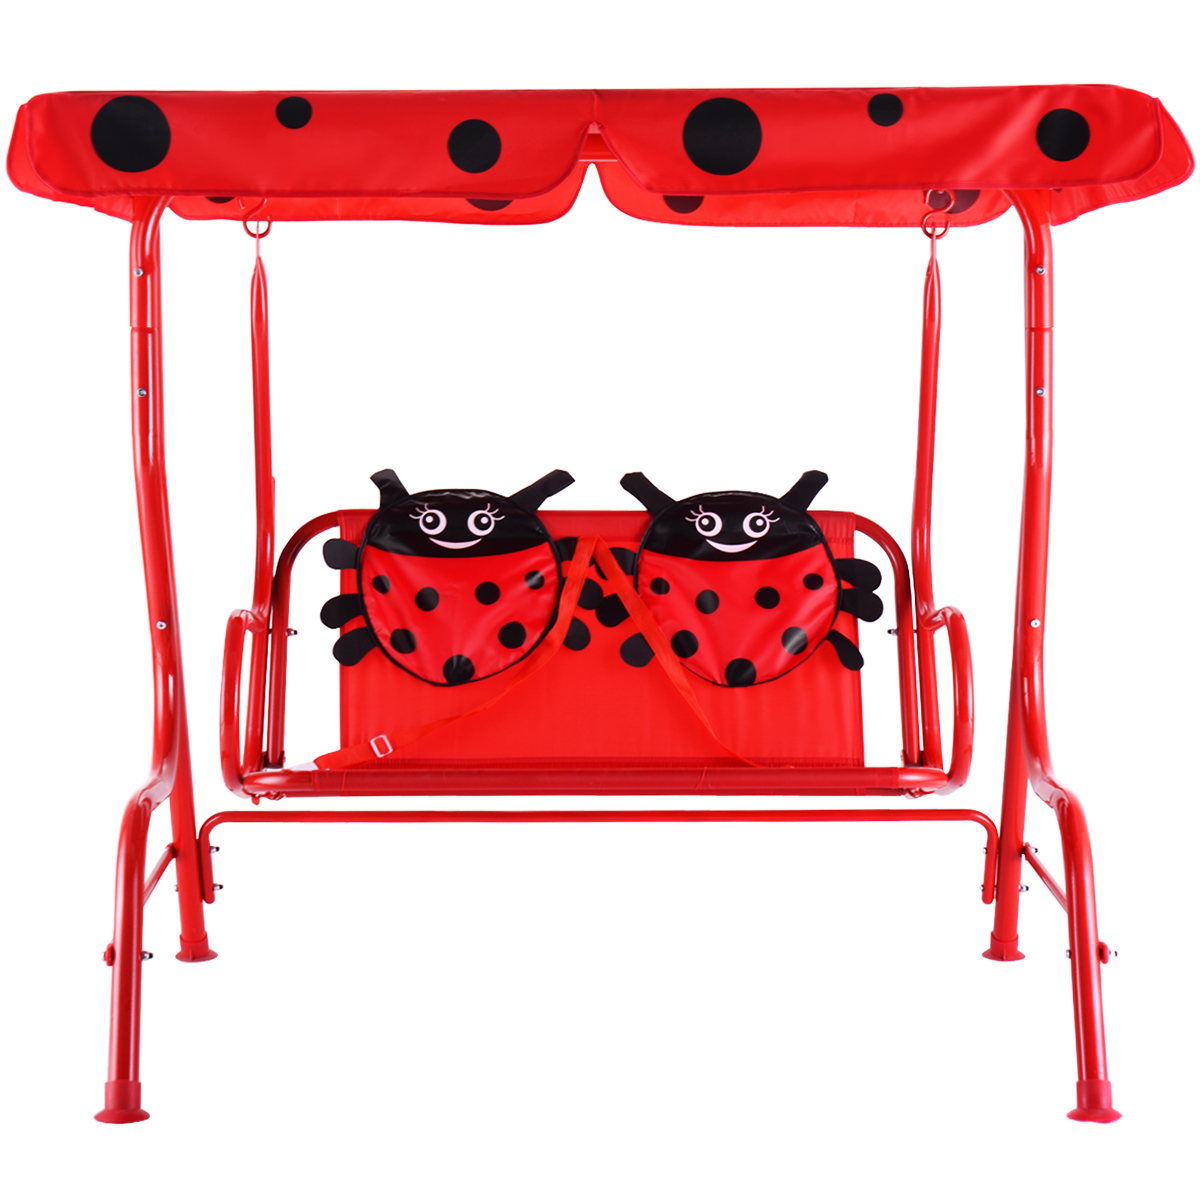 Costway Kids Patio Swing Chair Children Porch Bench Canopy 2 Person Yard Furniture red - image 3 of 10